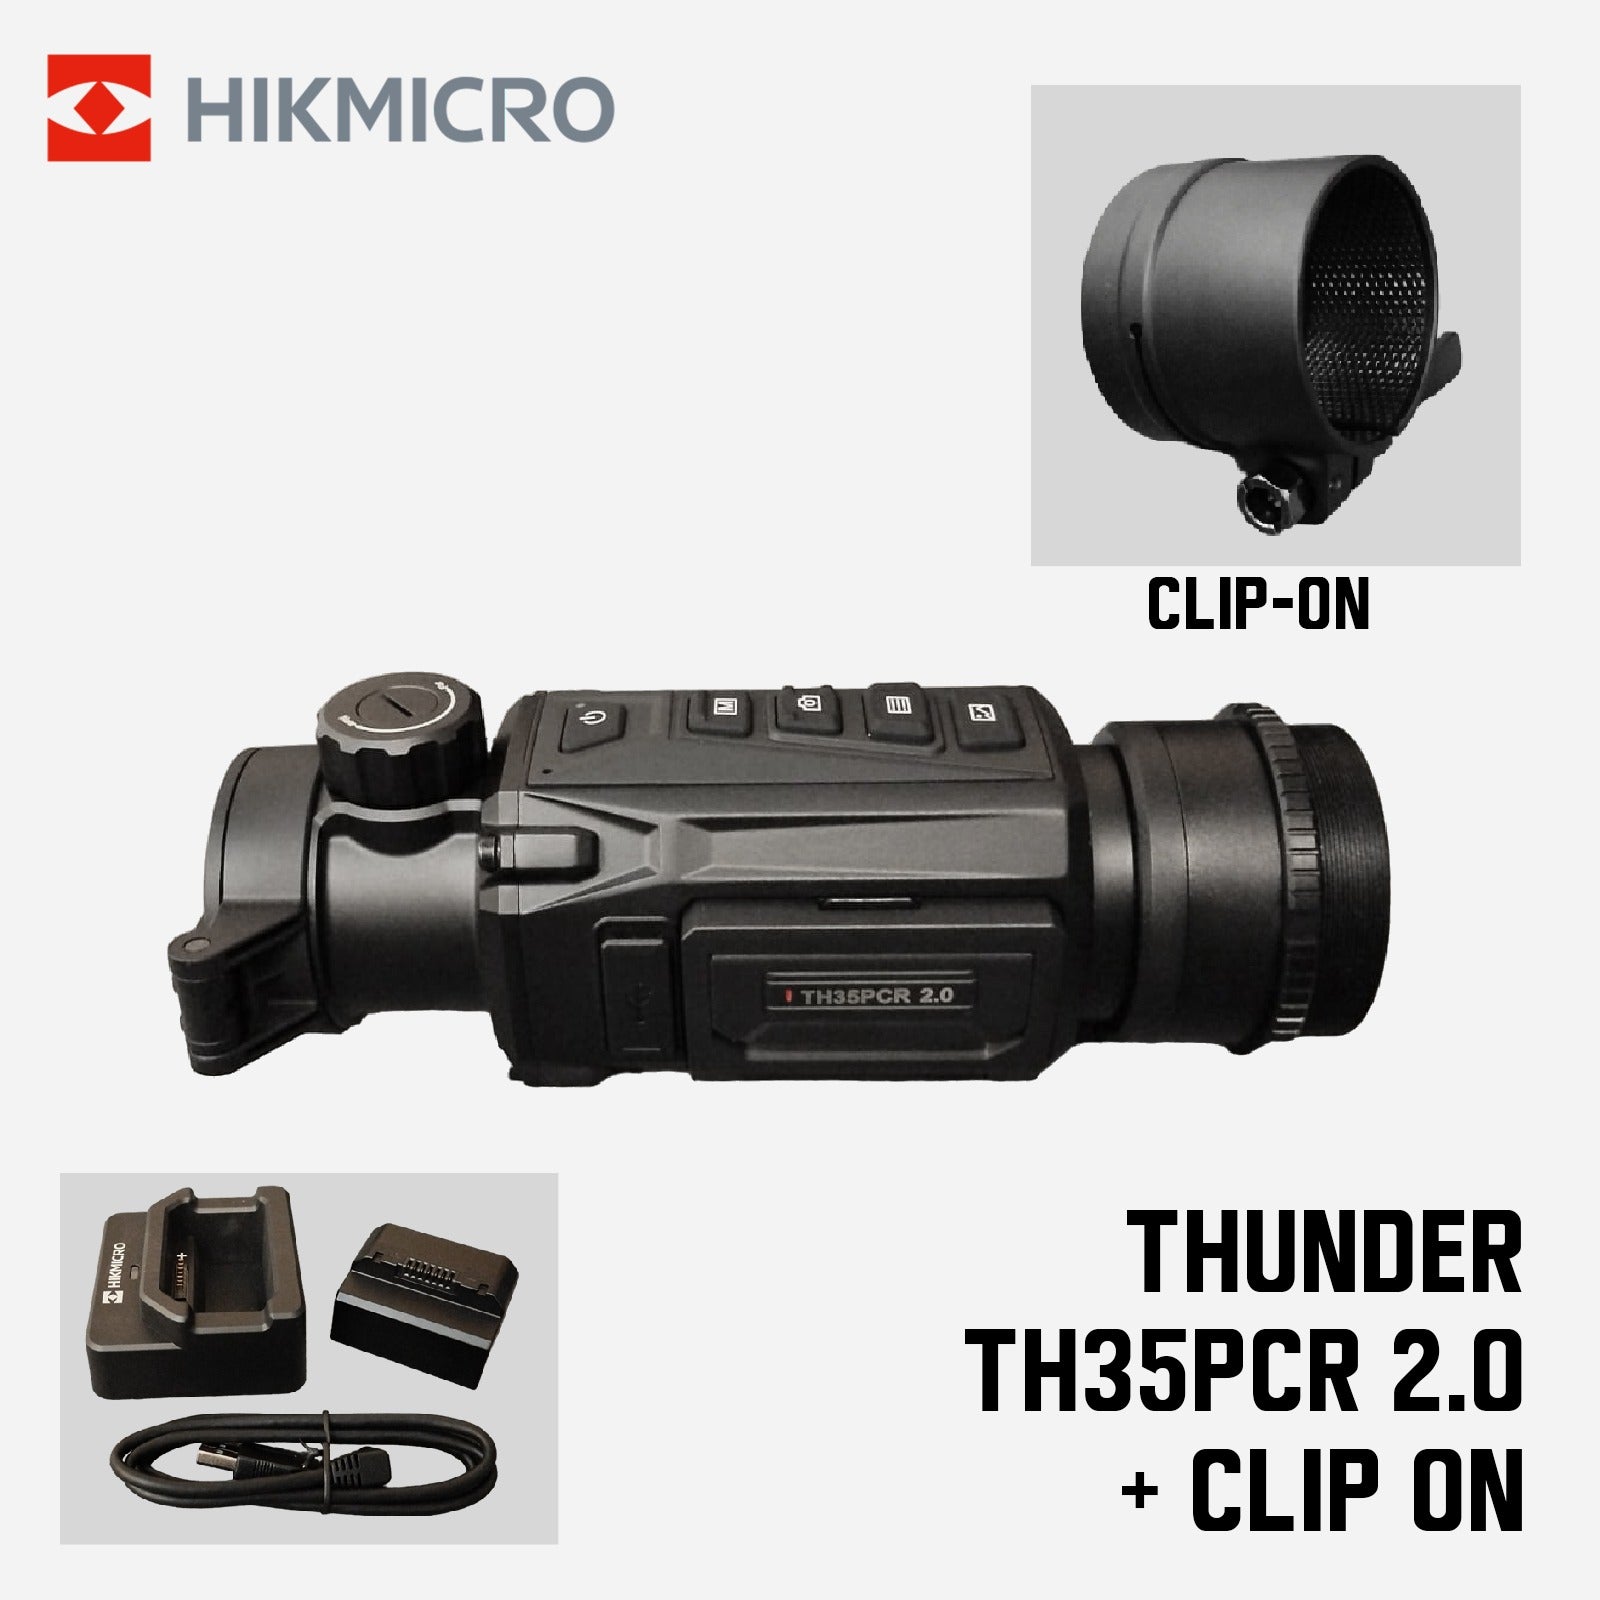 HIKMICRO THERMAL THUNDER CLIP ON TH35PCR 2.0